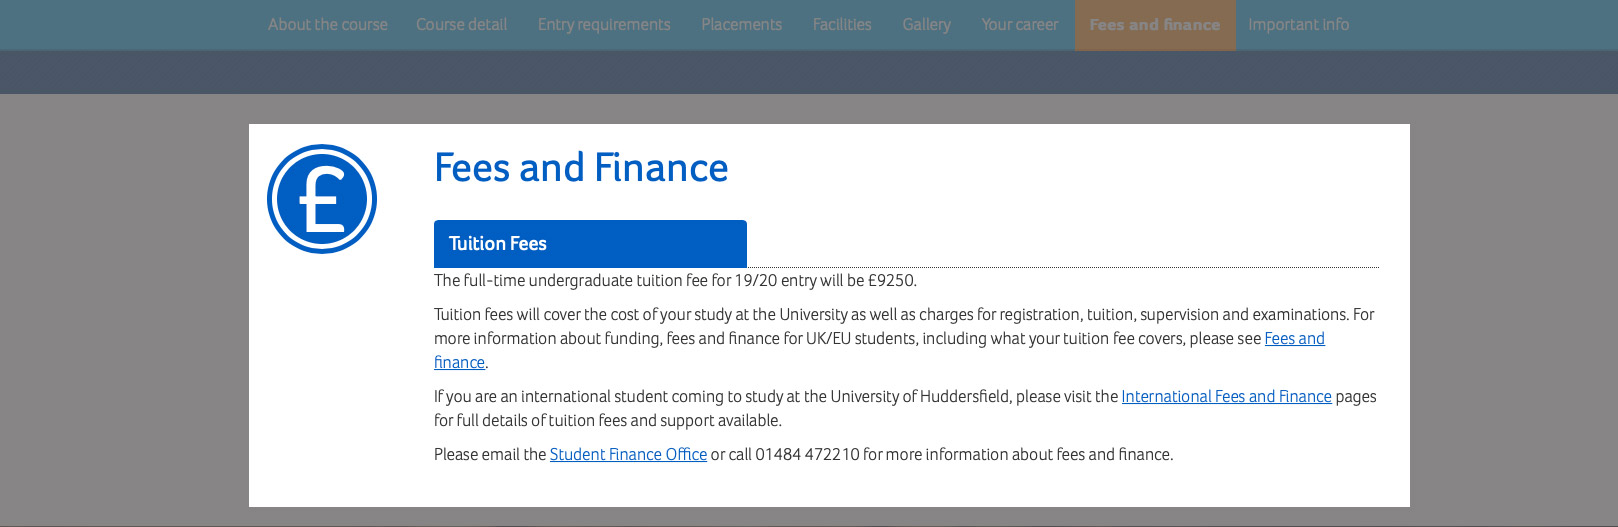 An image of the coursefinder area with the fees and finance highlighted.